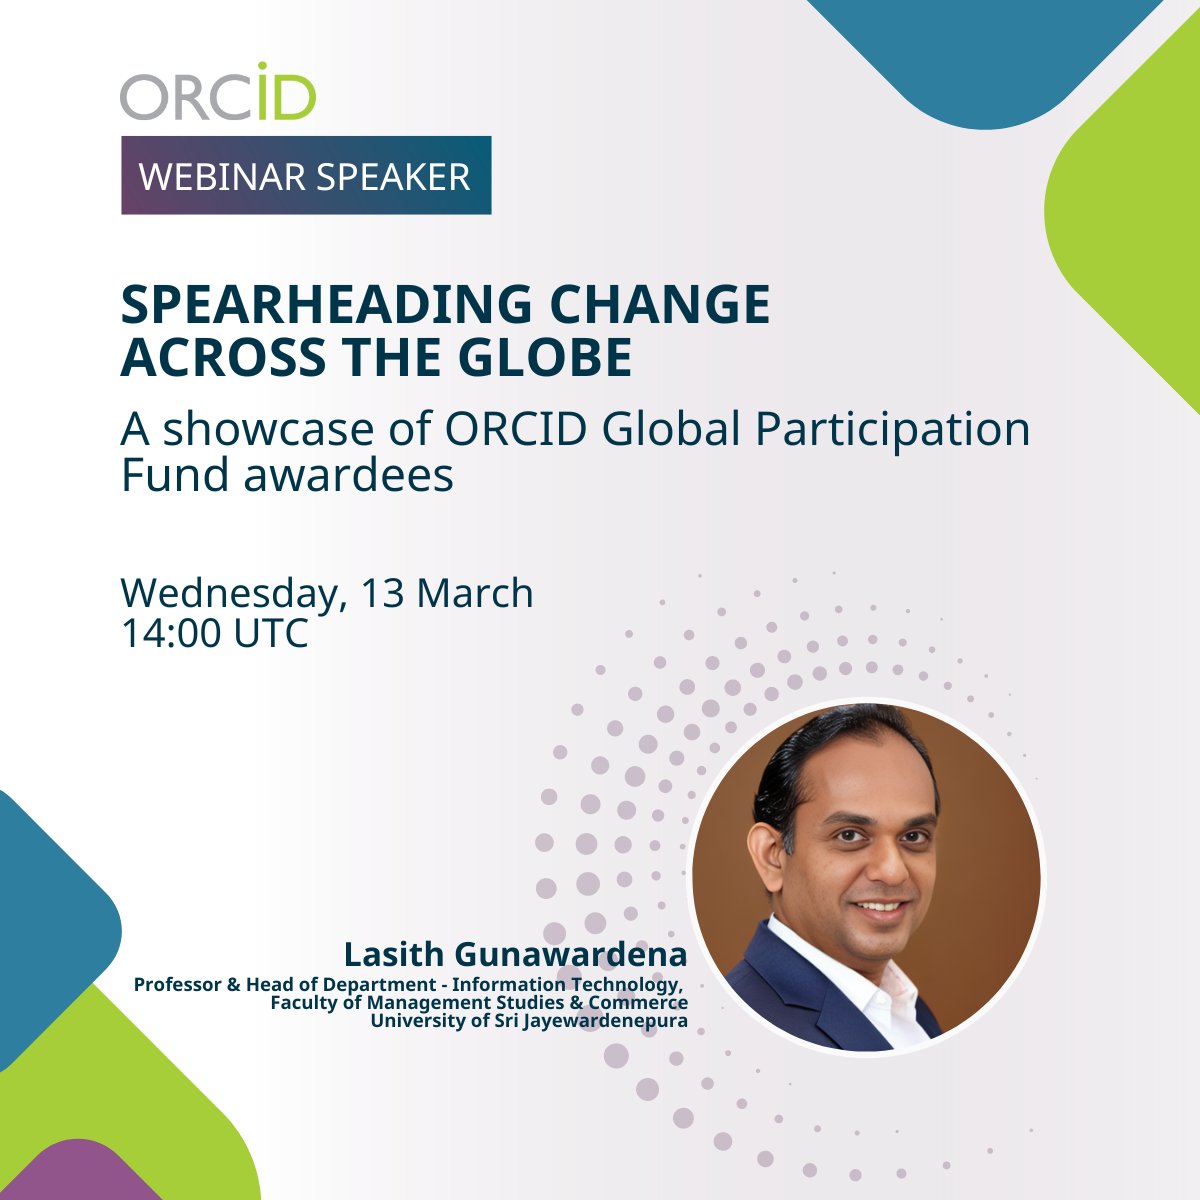 SPEAKER ANNOUNCEMENT 🗣️ On 13 March Lasith Gunawardena joins us for Spearheading Change Across the Globe: A showcase of ORCID Global Participation Fund awardees. Save your spot now! bit.ly/3SUwJZf